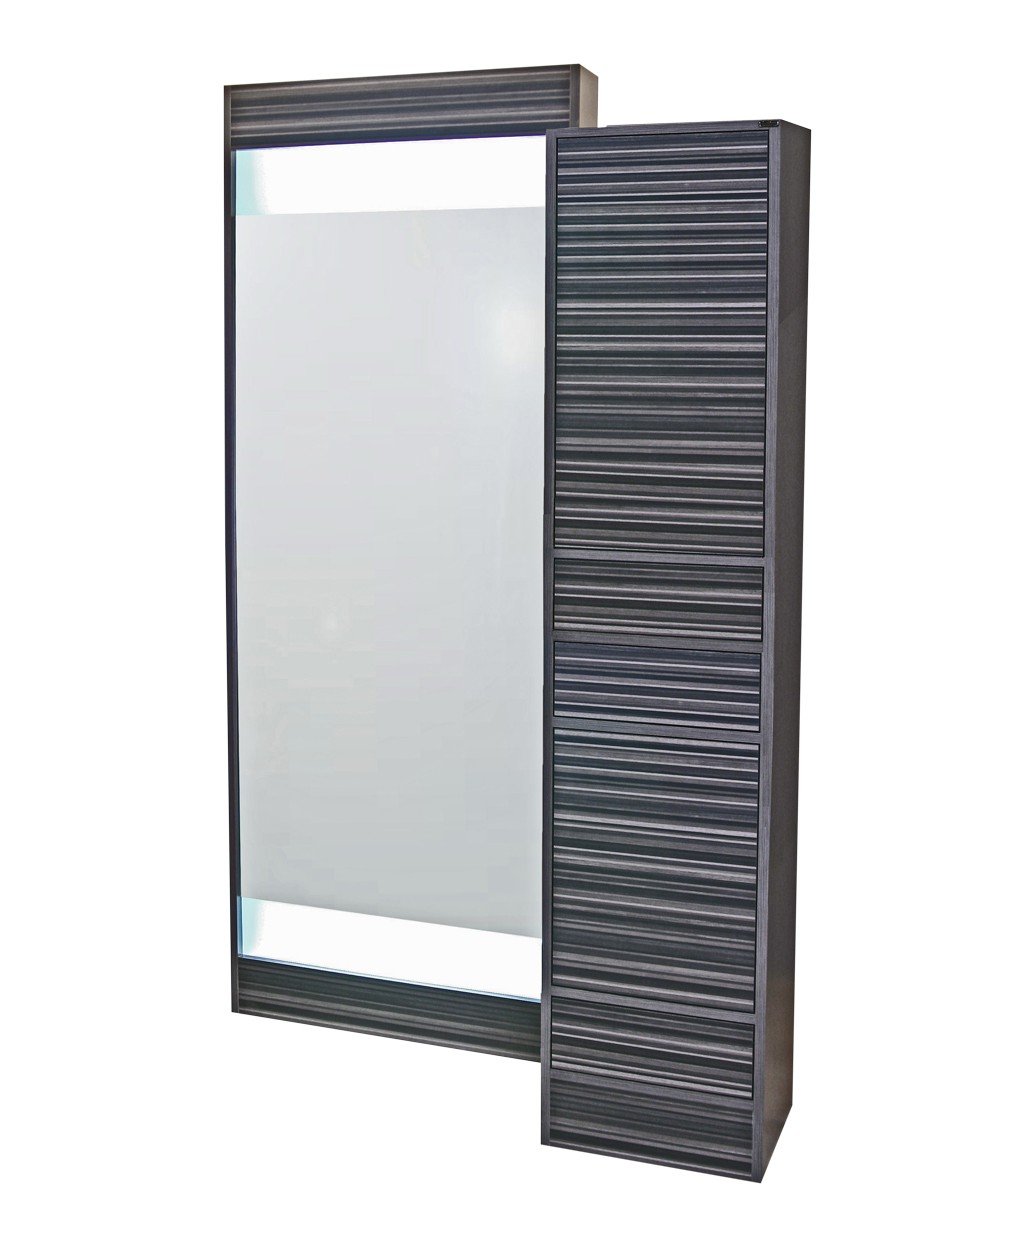 Collins 6630 Edge Styling Tower w/ Back-Lit Mirror